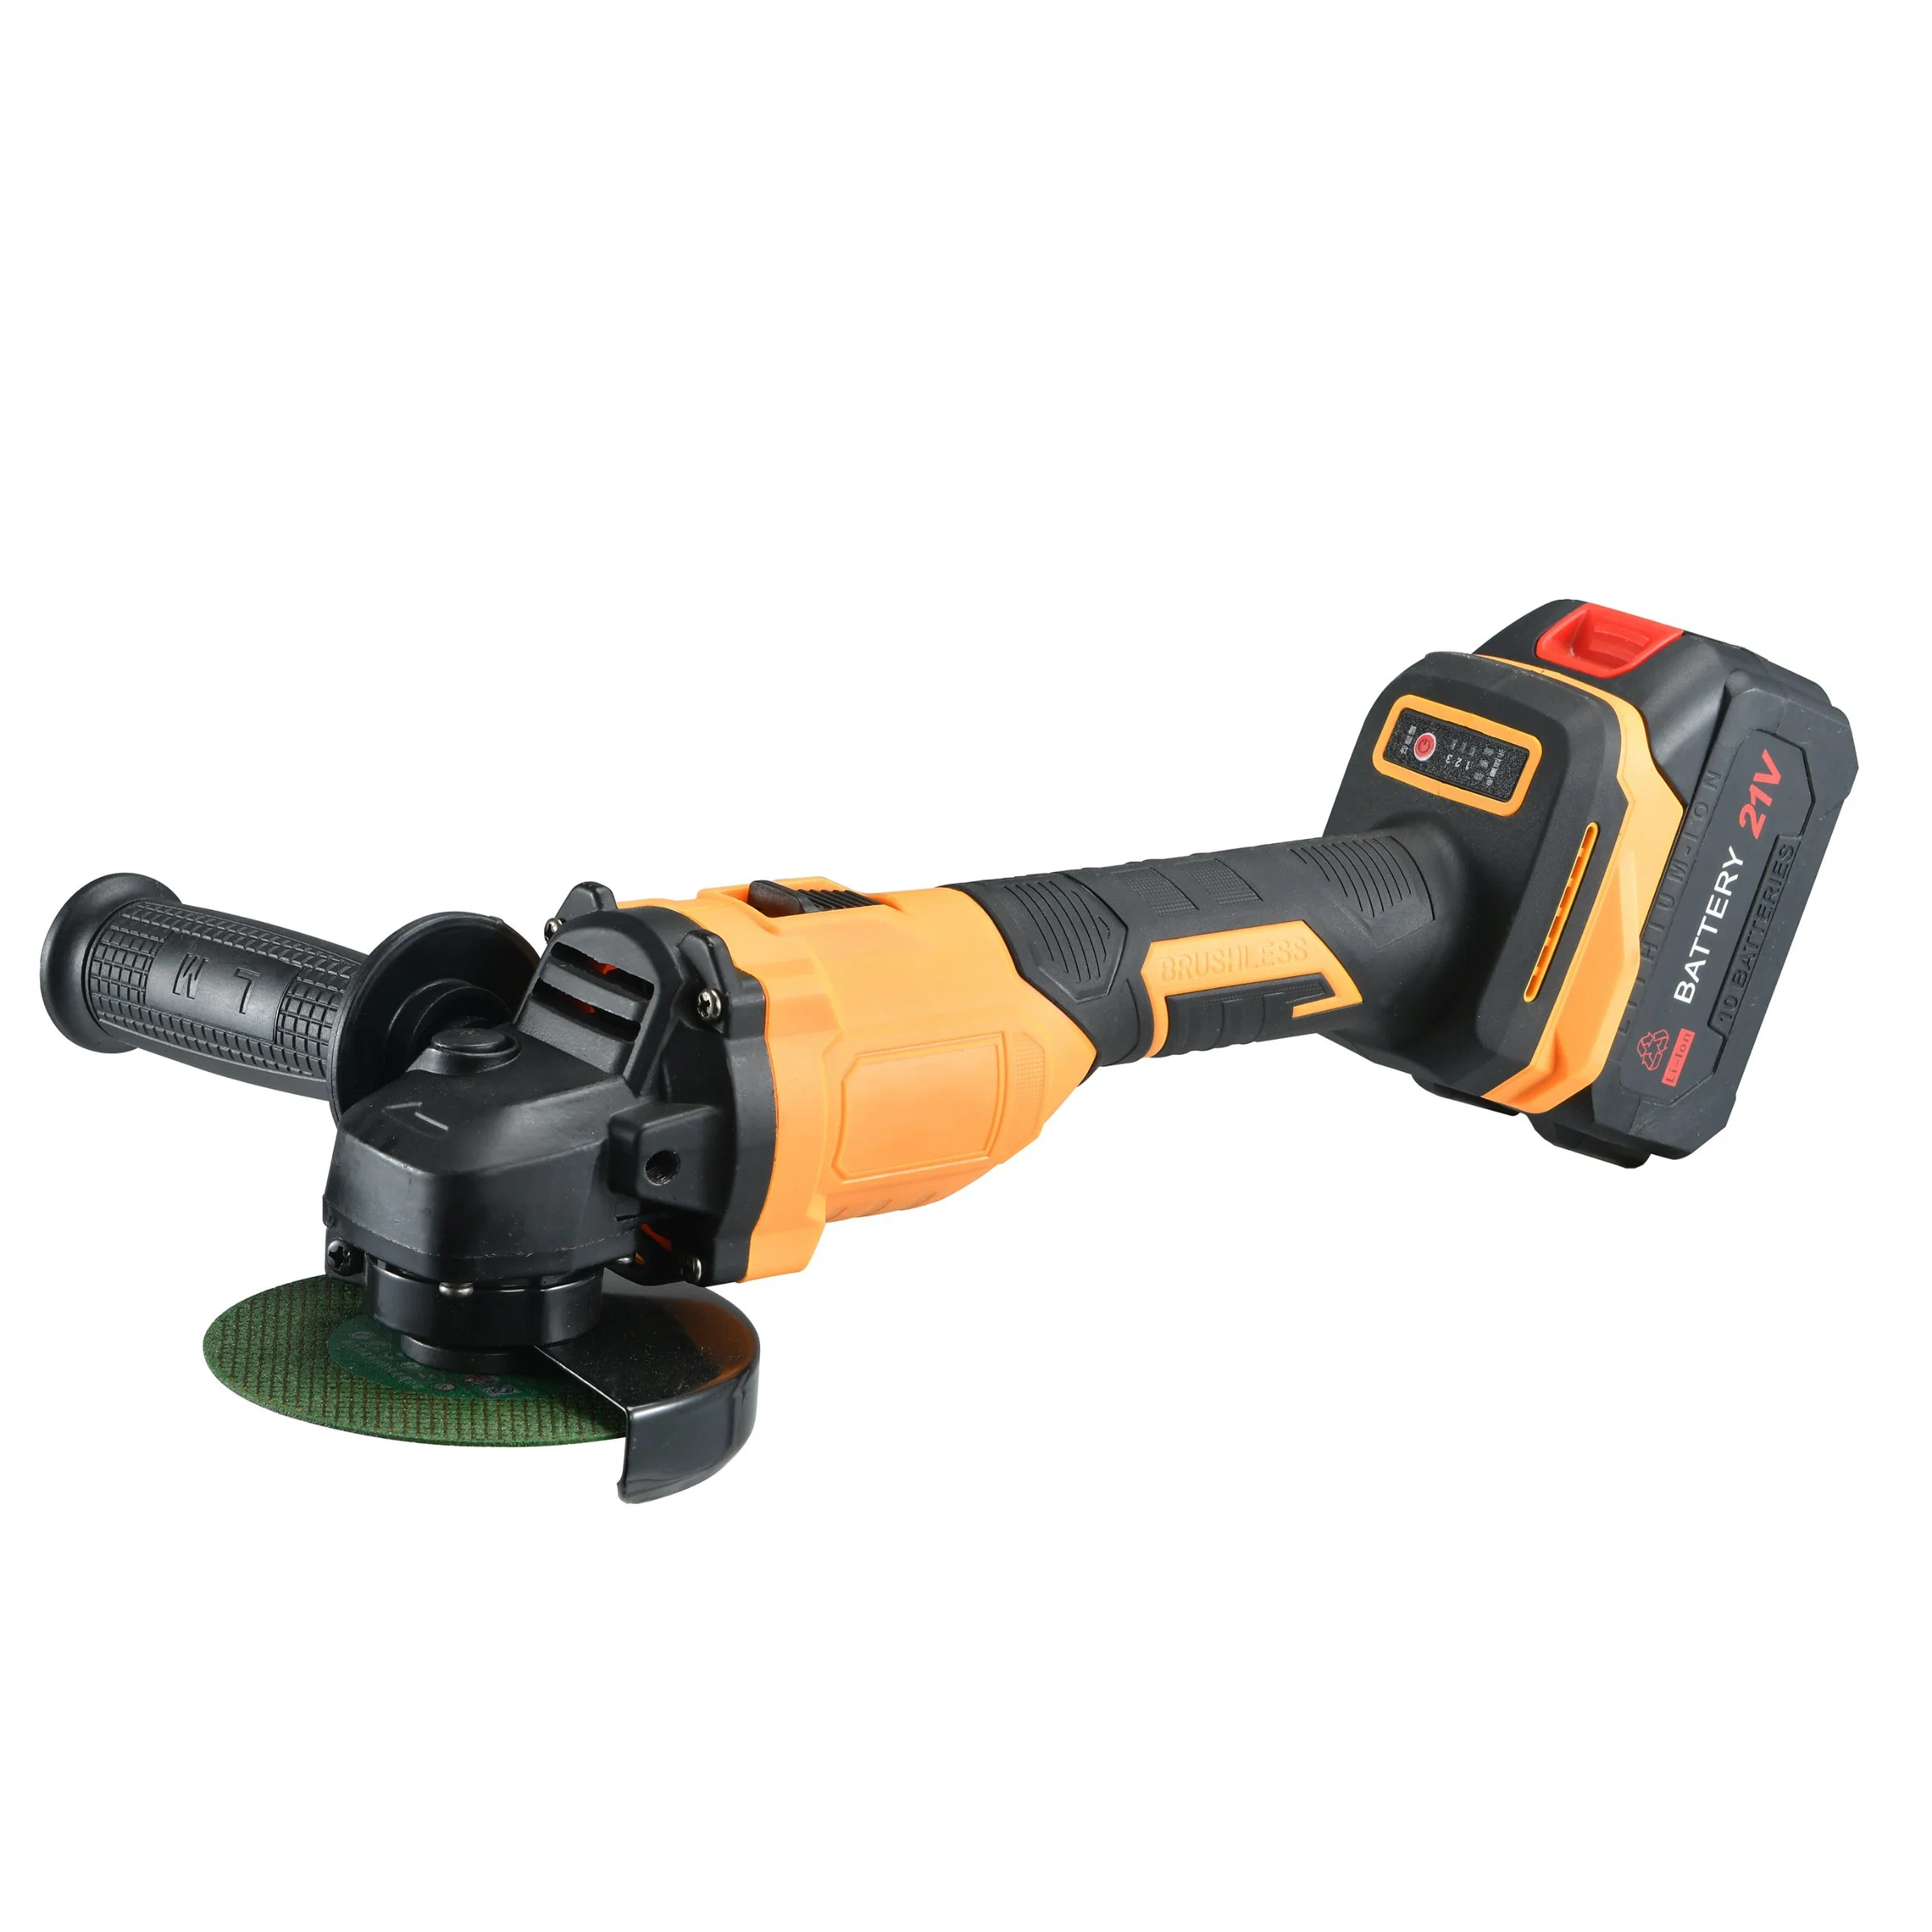 Electric Angle Grinder High Quality Reversible Angle Grinders Power Tool 900W